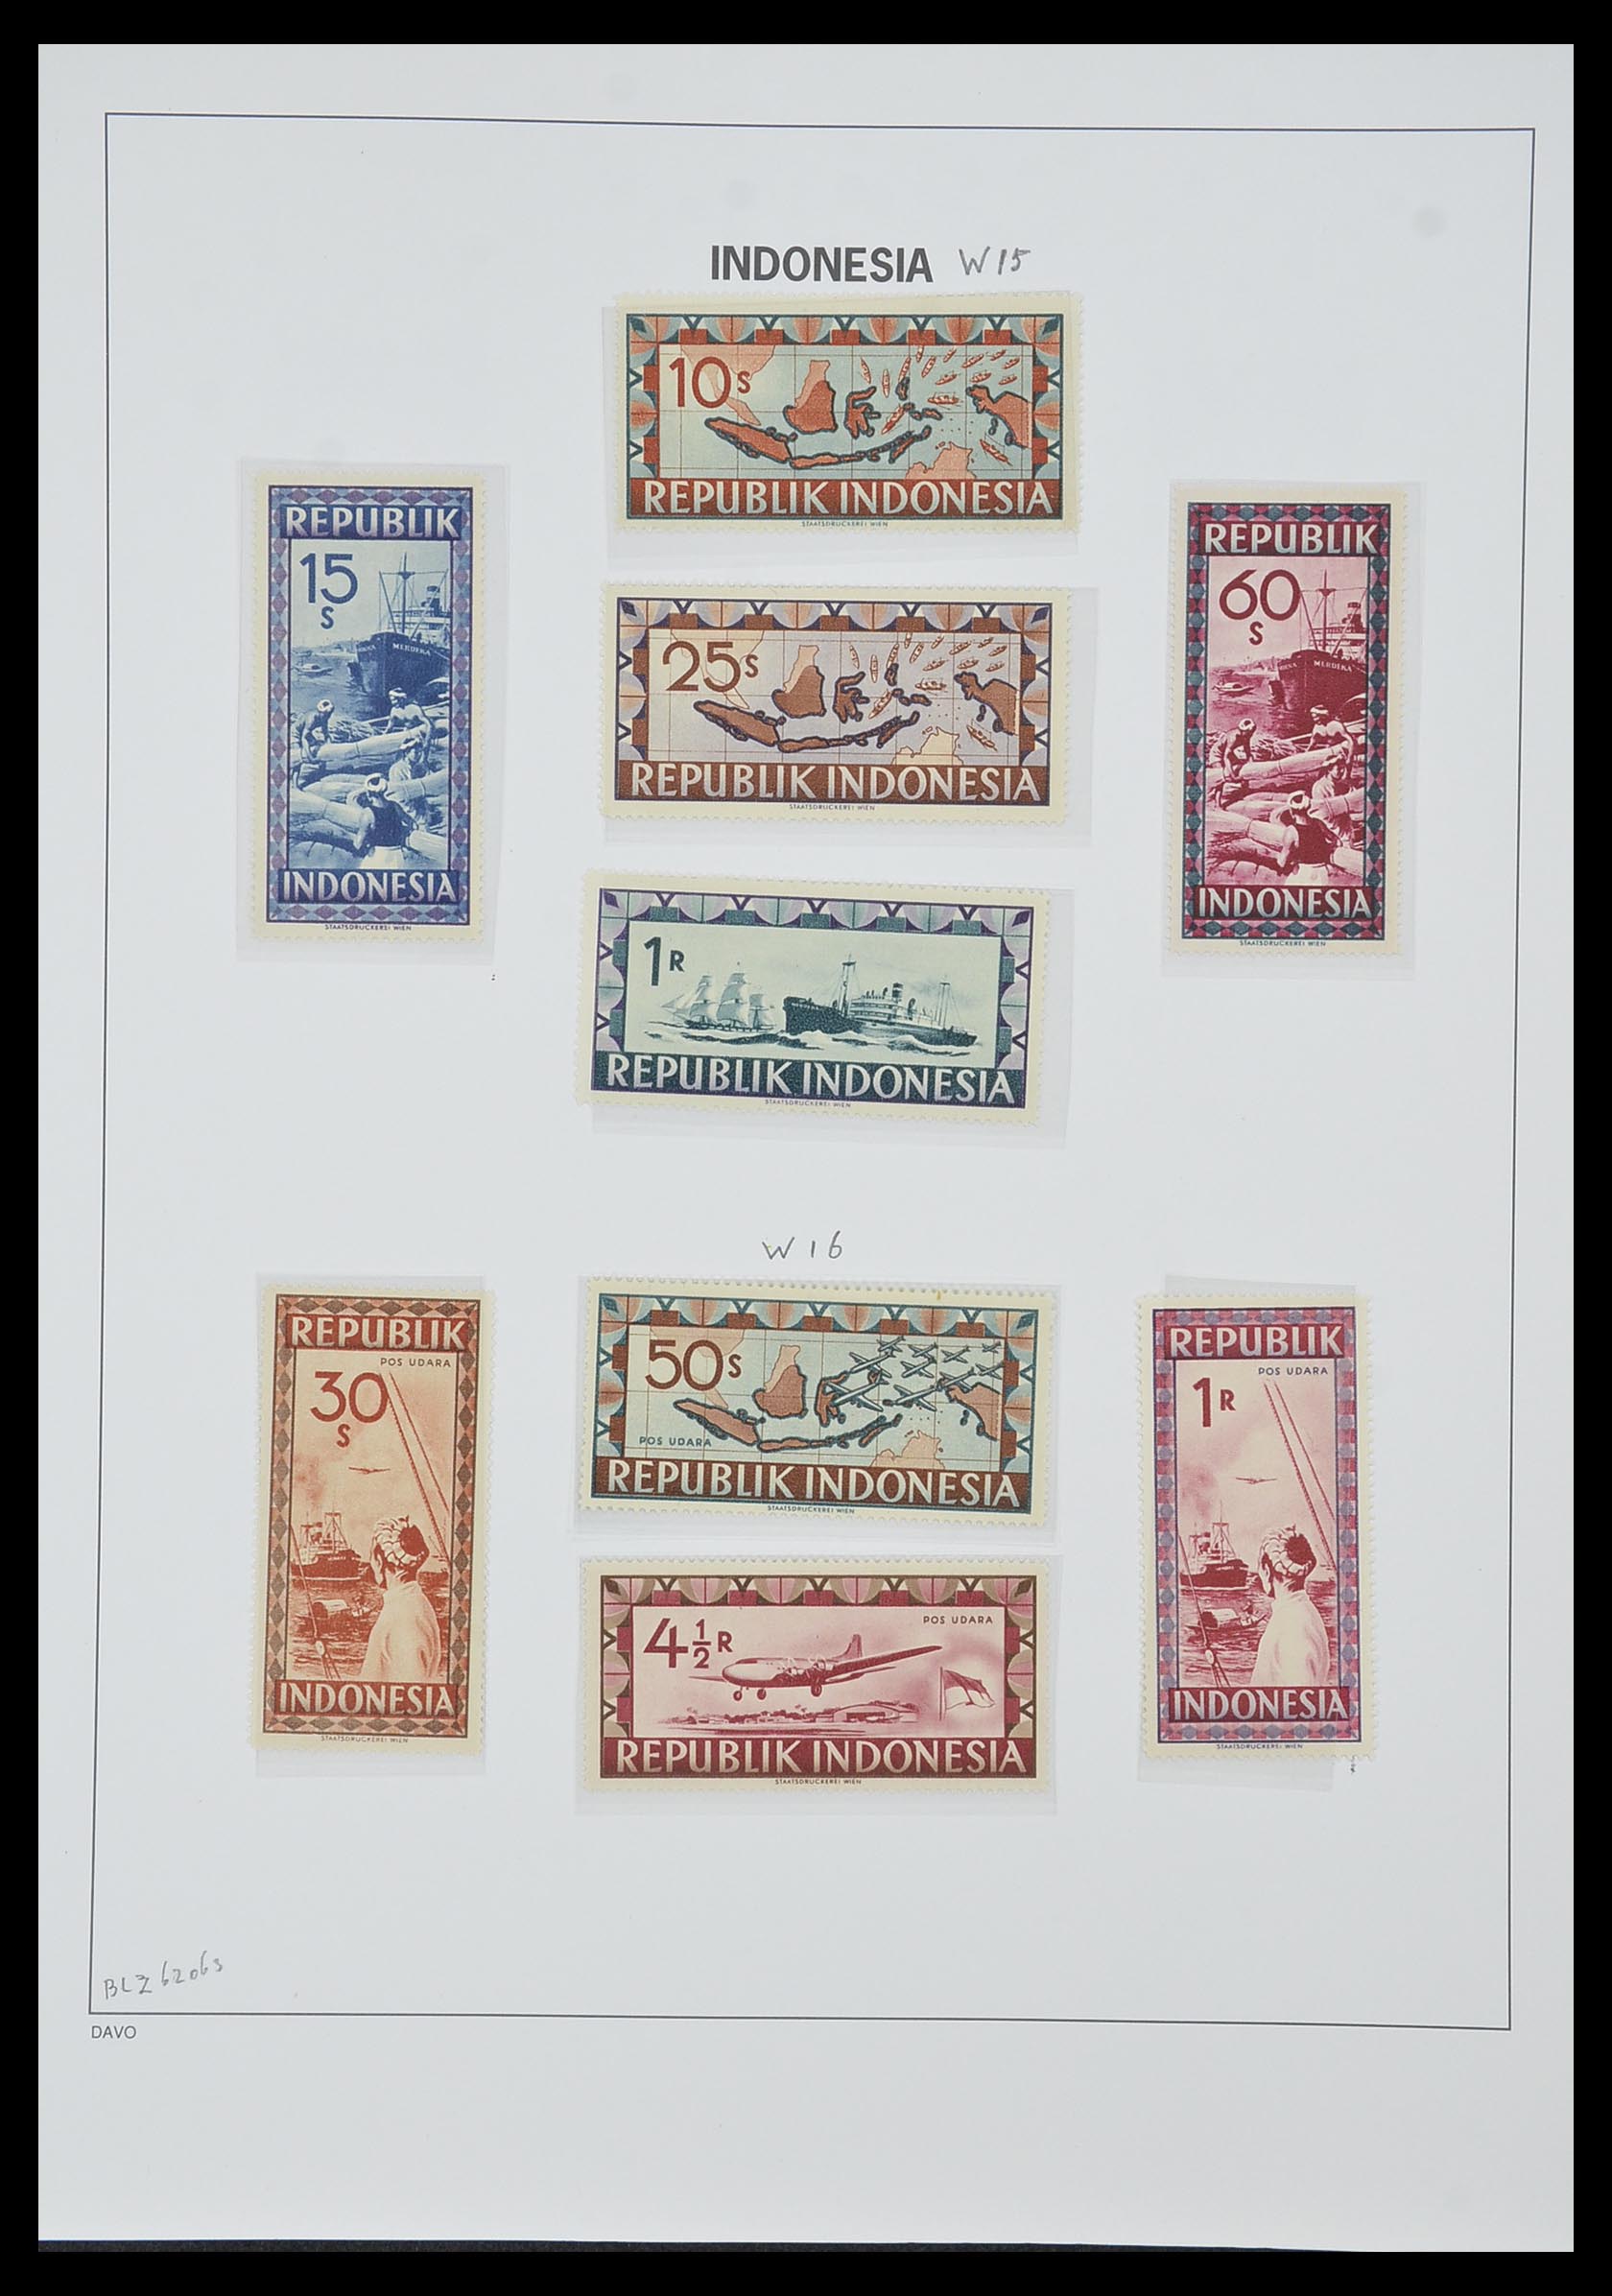 33988 027 - Stamp collection 33988 Vienna printings Indonesia.